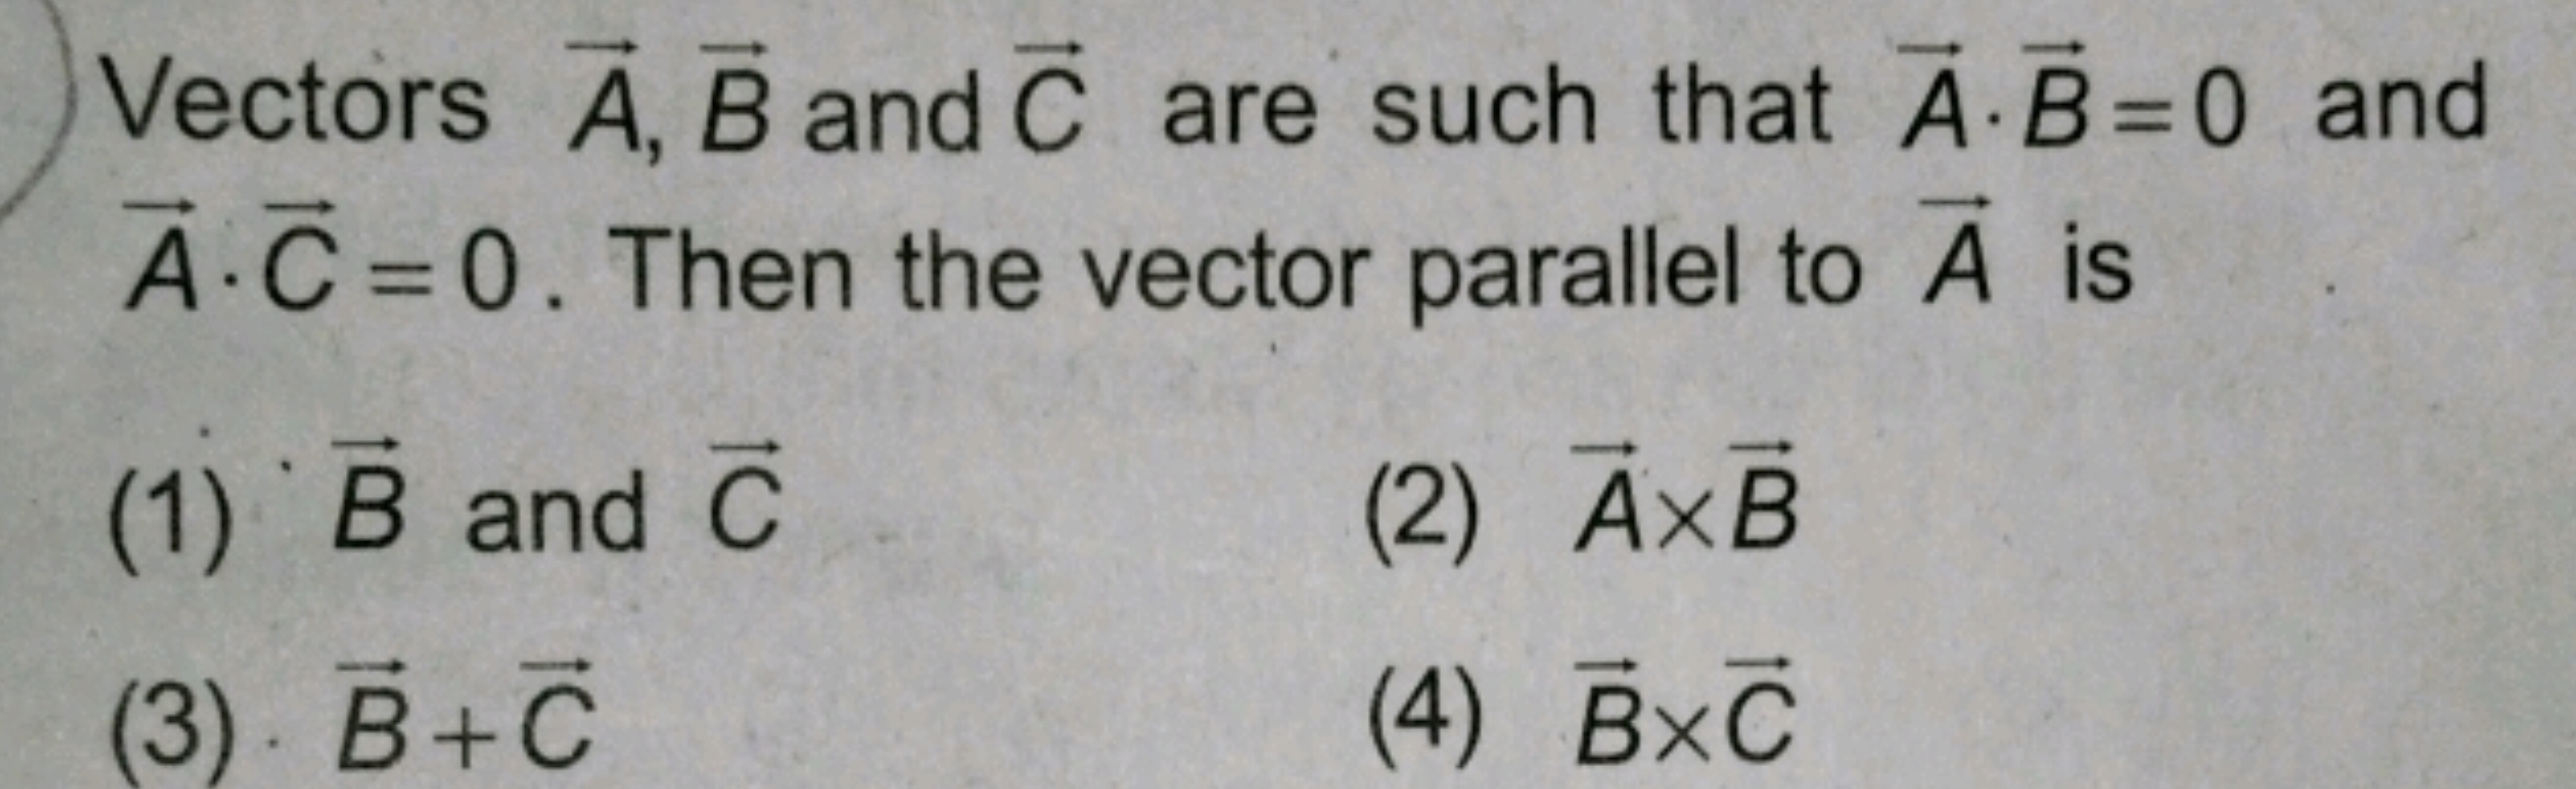 Vectors A,B and C are such that A⋅B=0 and A⋅C=0. Then the vector paral